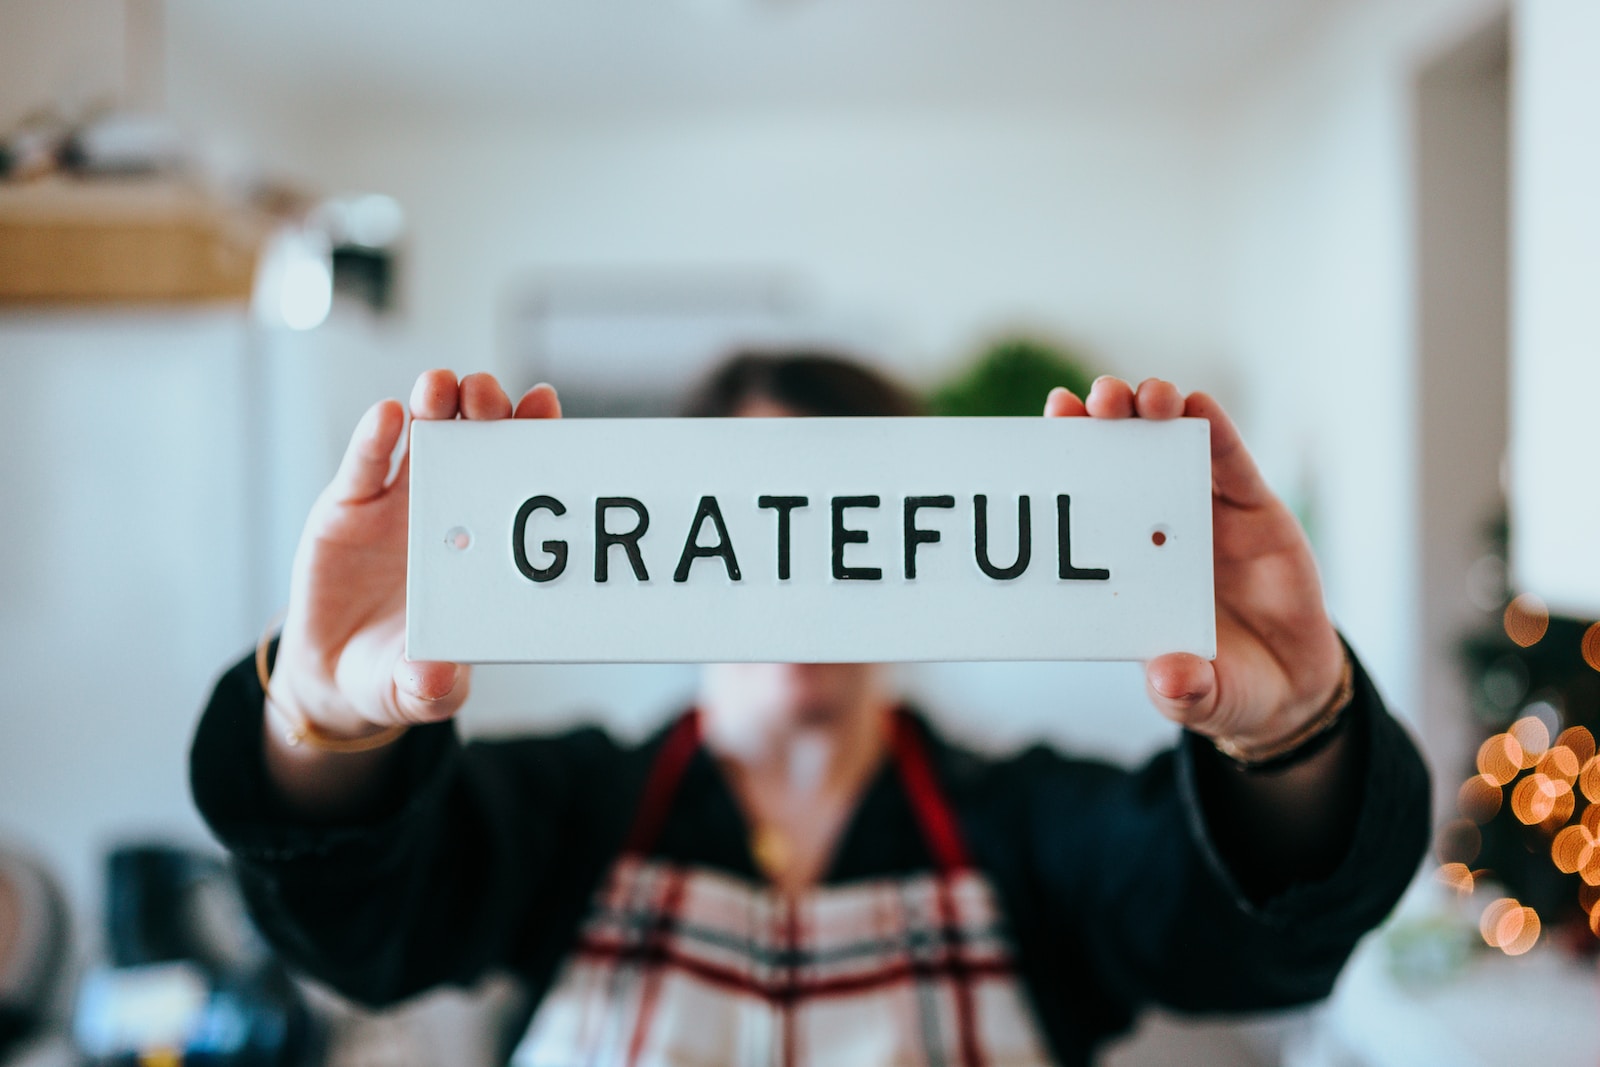 Stop comparing your body gratitude